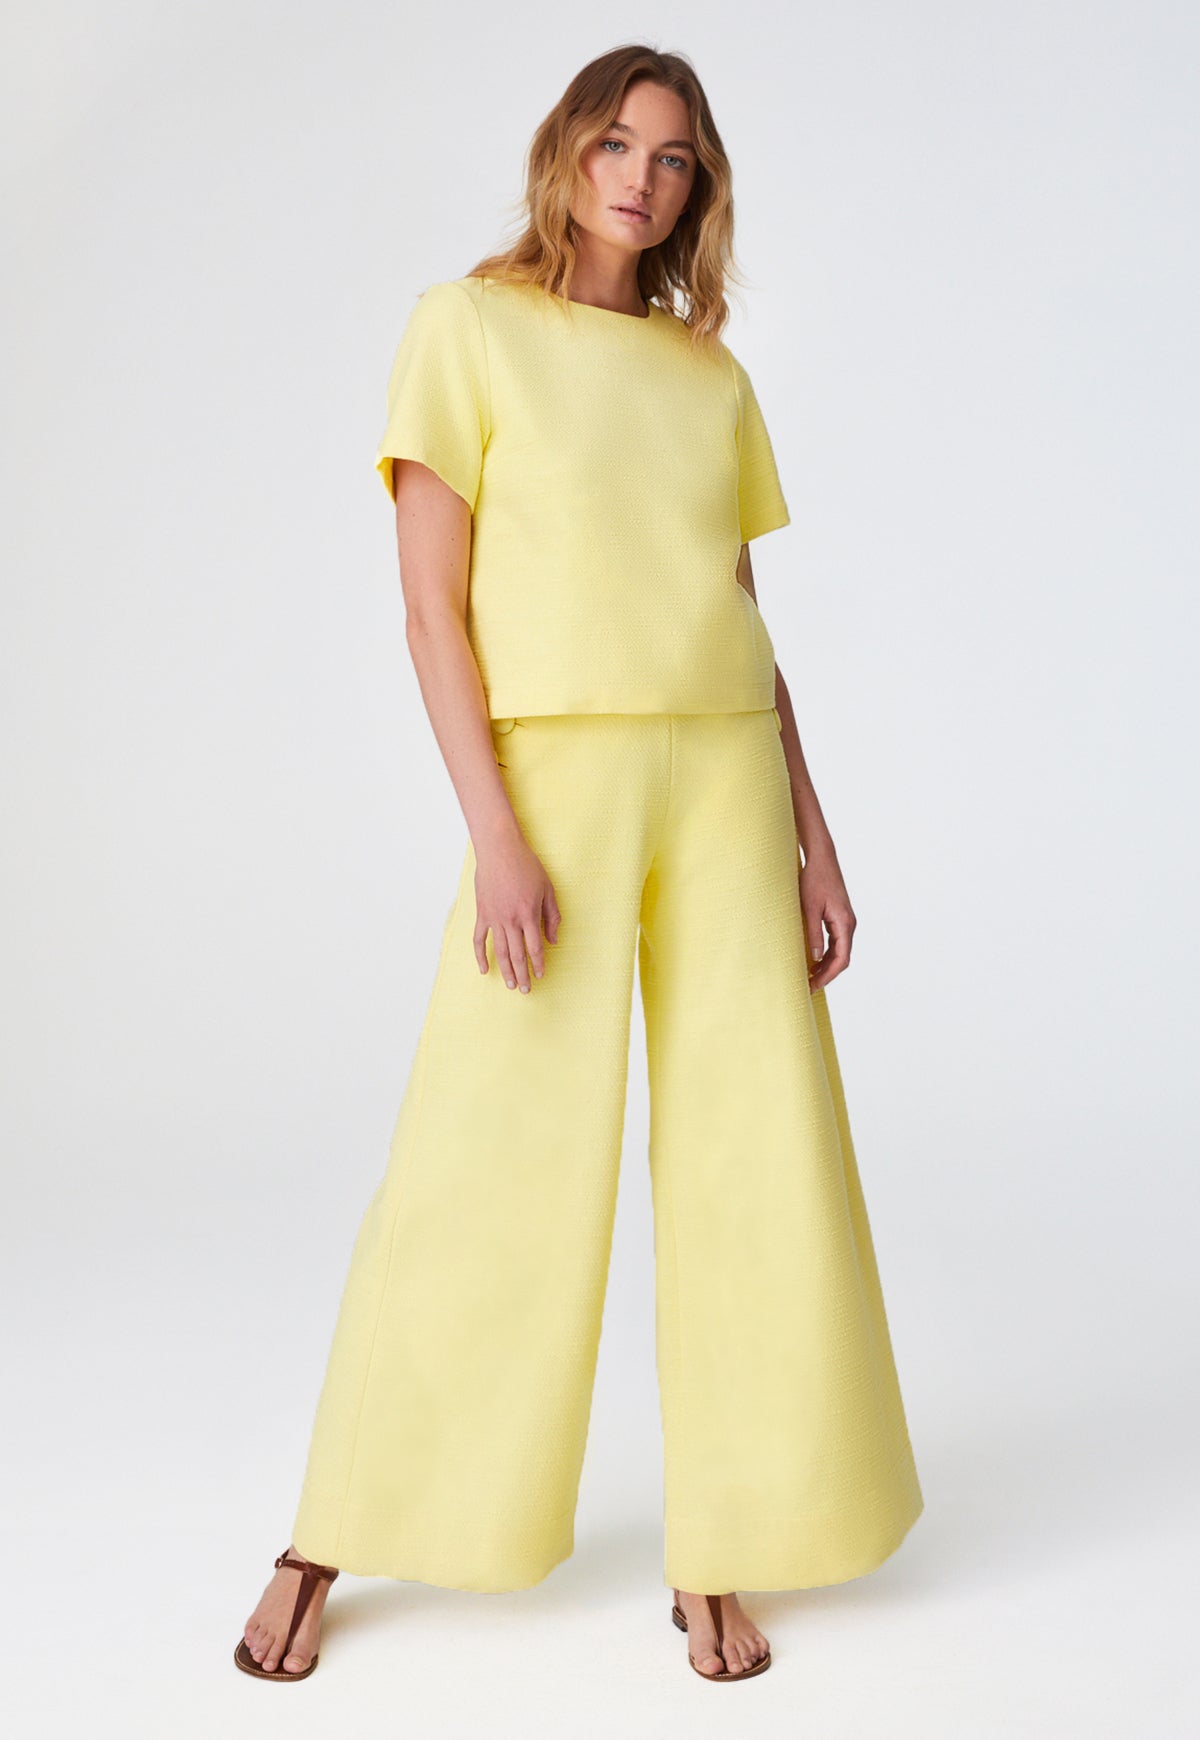 THE T-SHIRT in LEMON TEXTURED COTTON